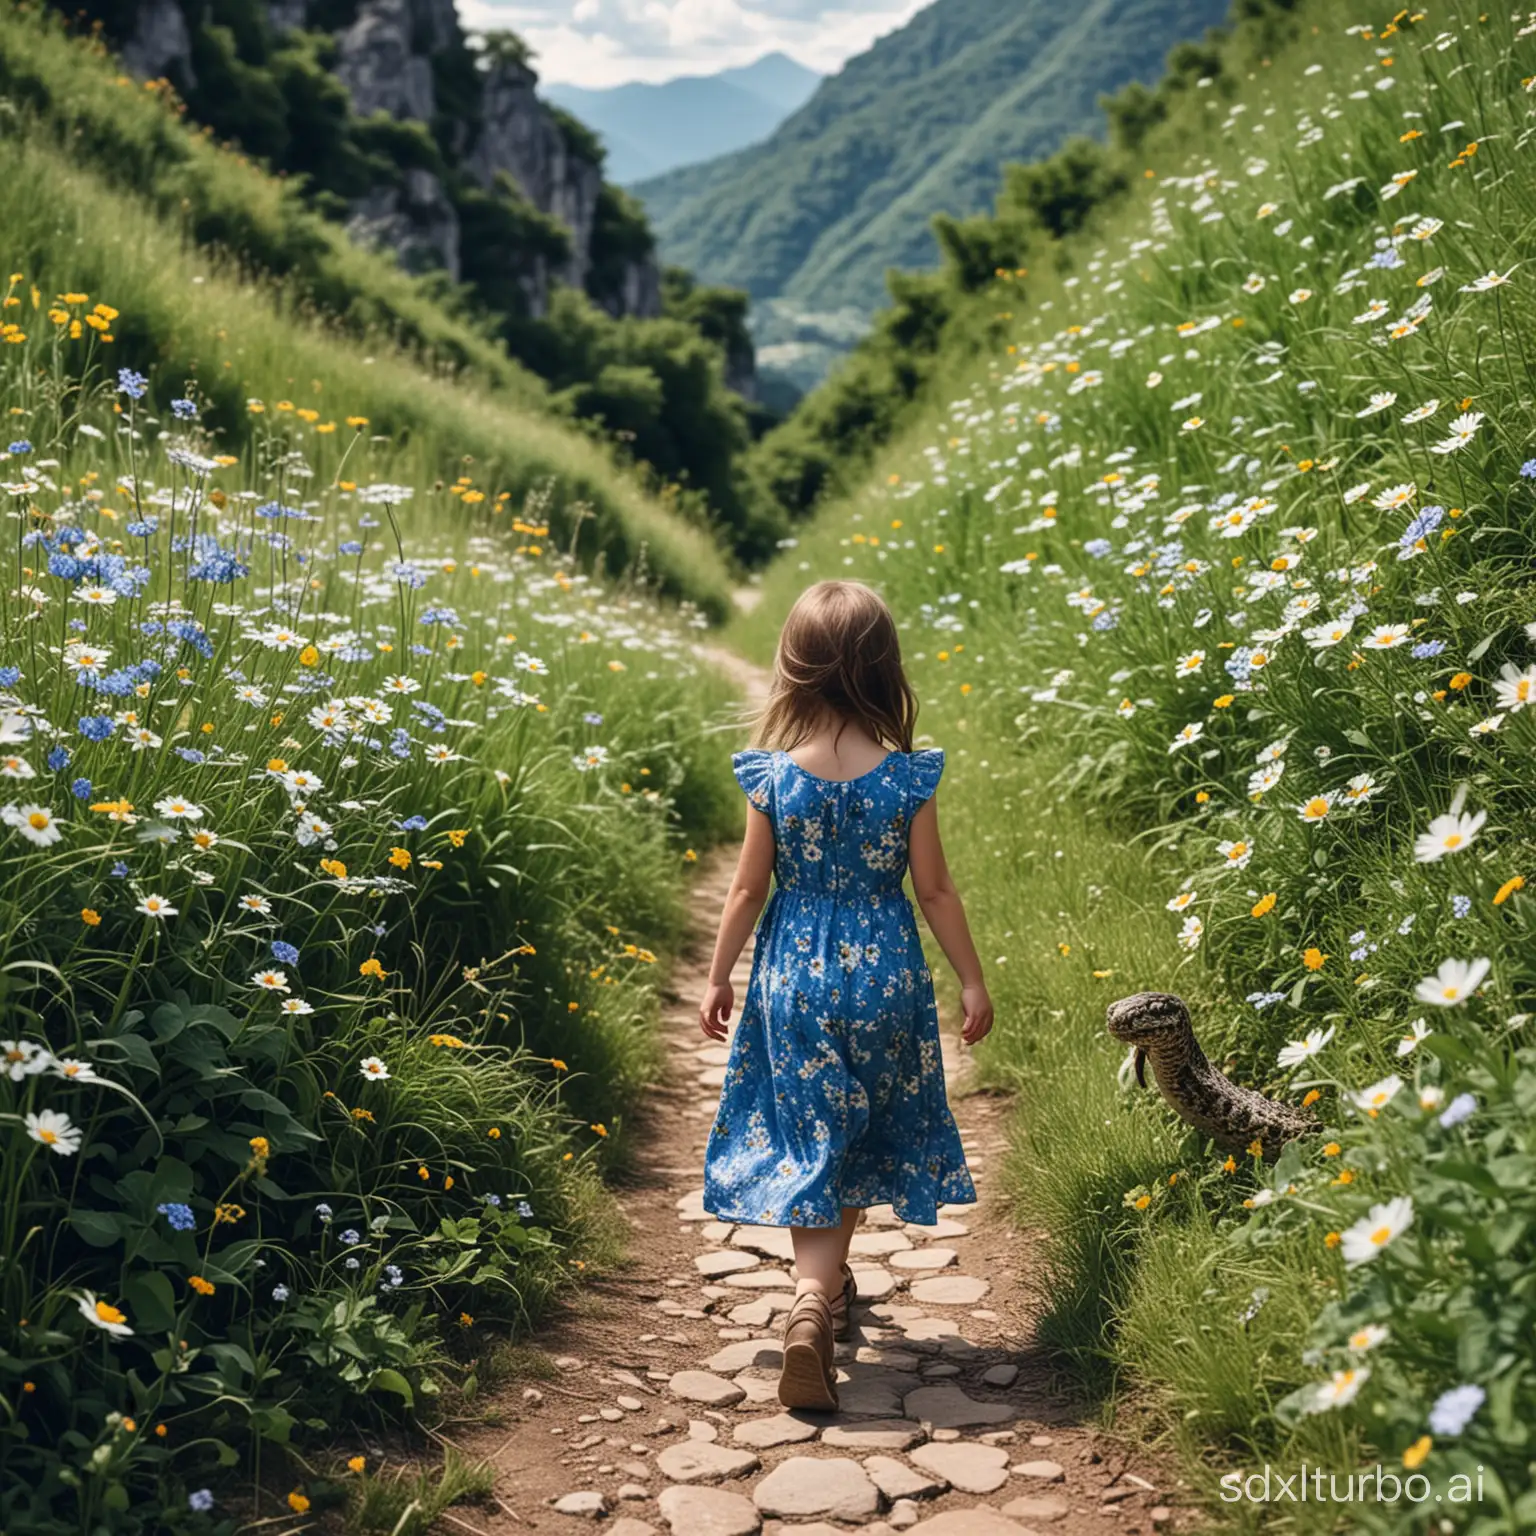 A little girl in a blue floral dress, walking on a mountain path surrounded by flowers and grass on both sides, encountered a python coming towards her.